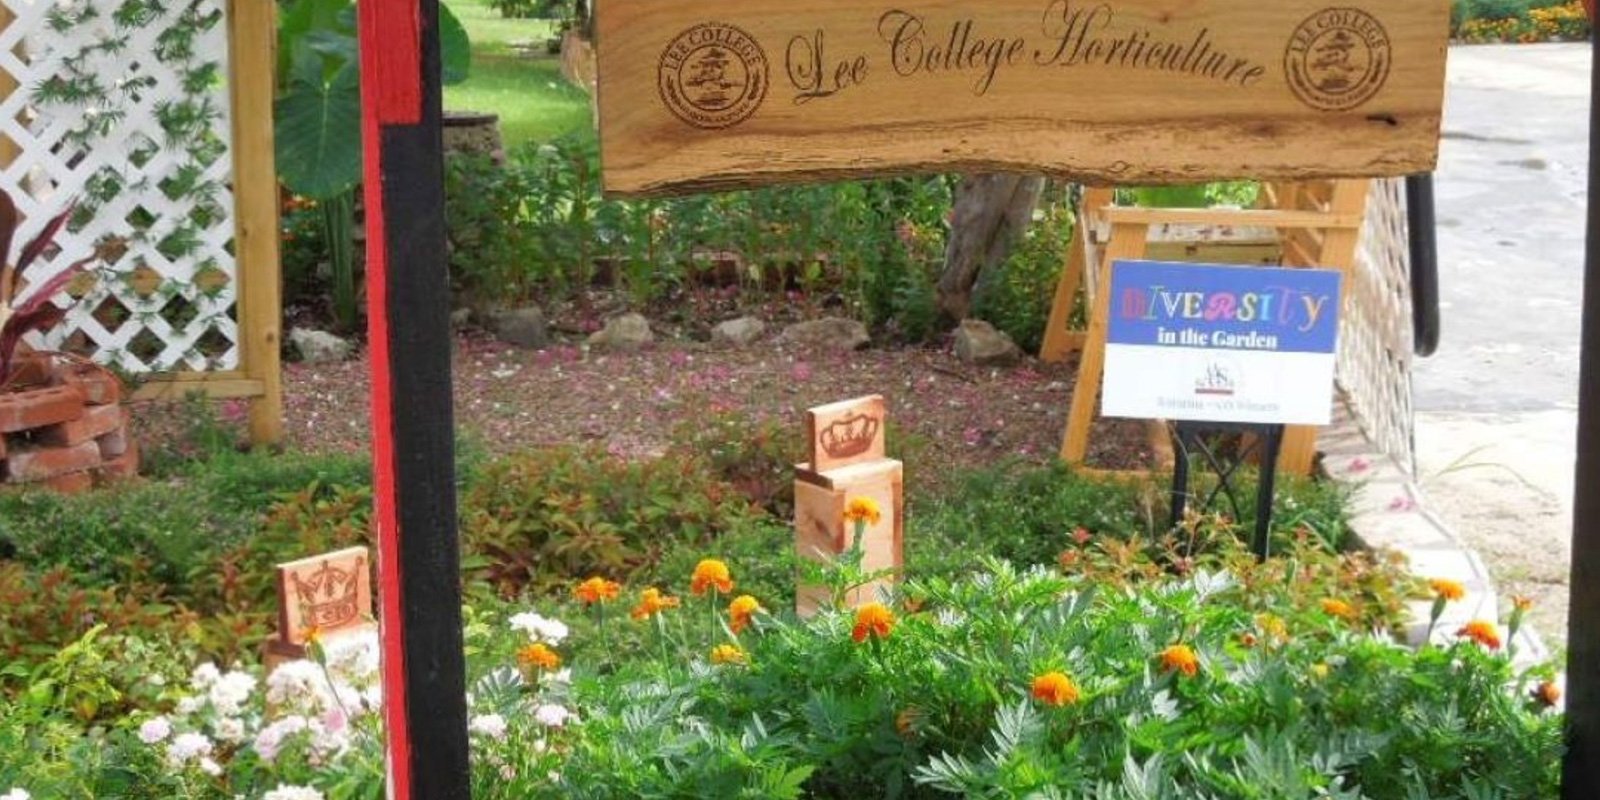 A photo of a Lee College garden entered in the contest.